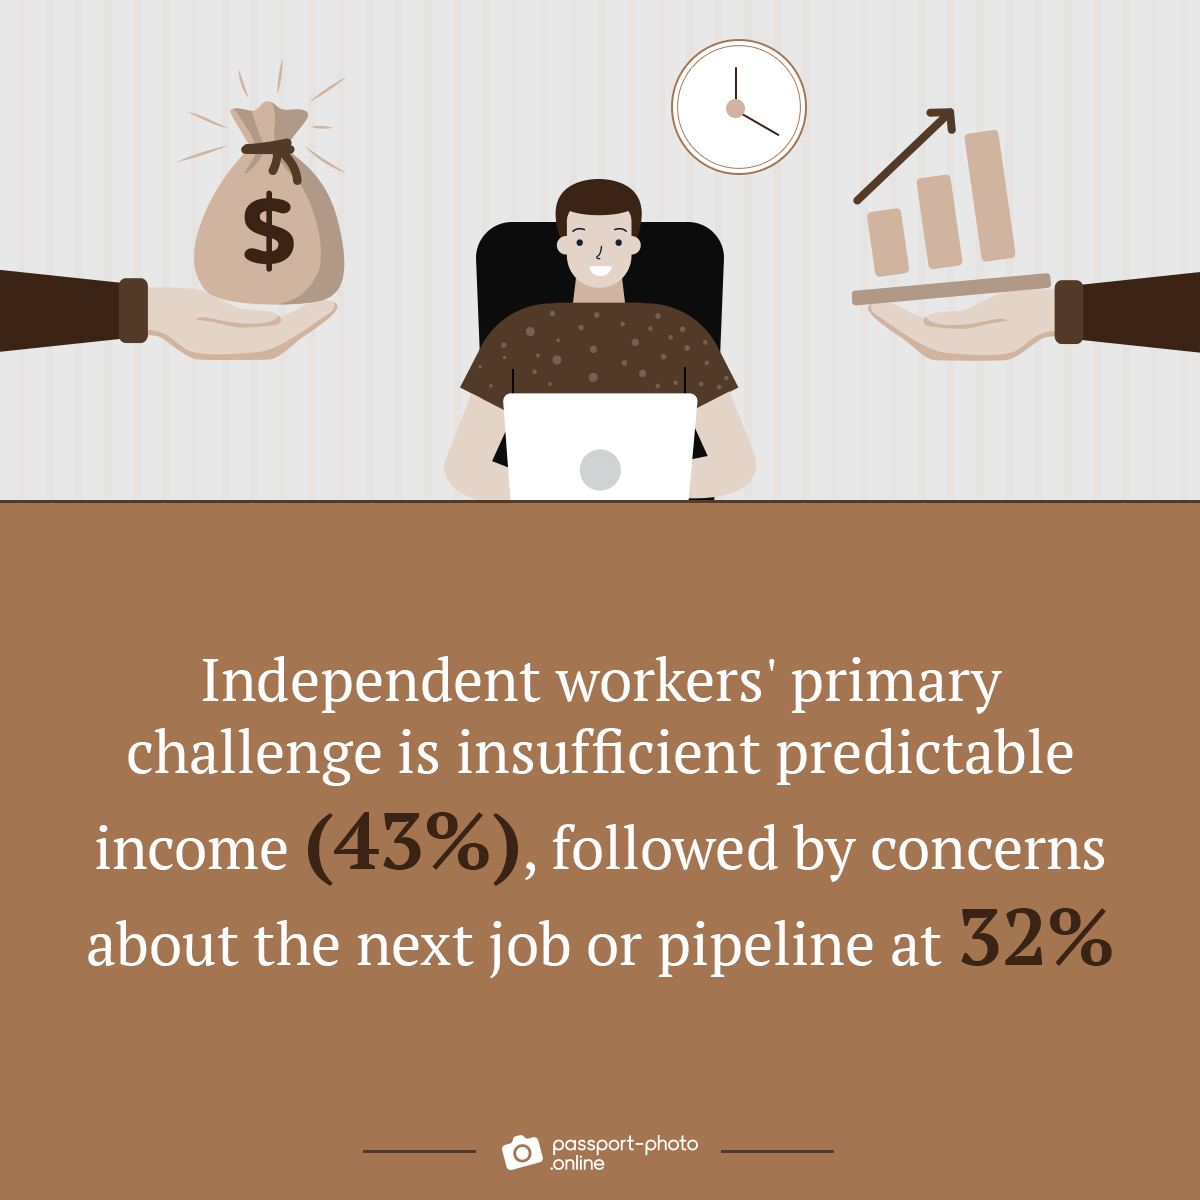 43% of independent workers struggle with insufficient predictable income, while 32% worry about their next job or pipeline